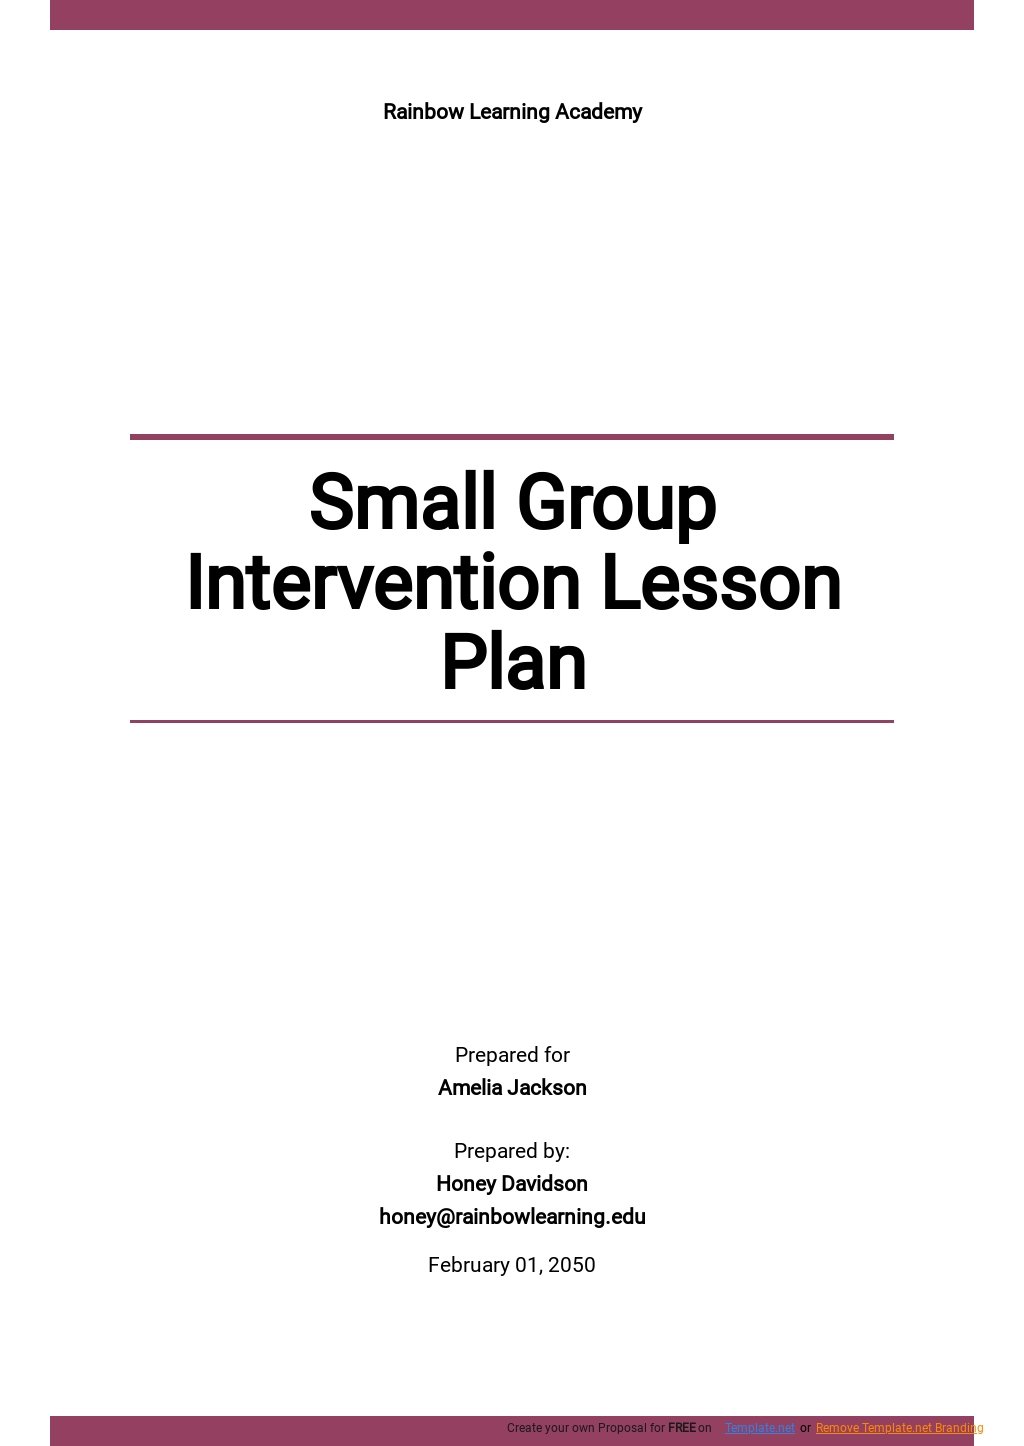 math-intervention-lesson-plan-template-google-docs-word-apple-pages